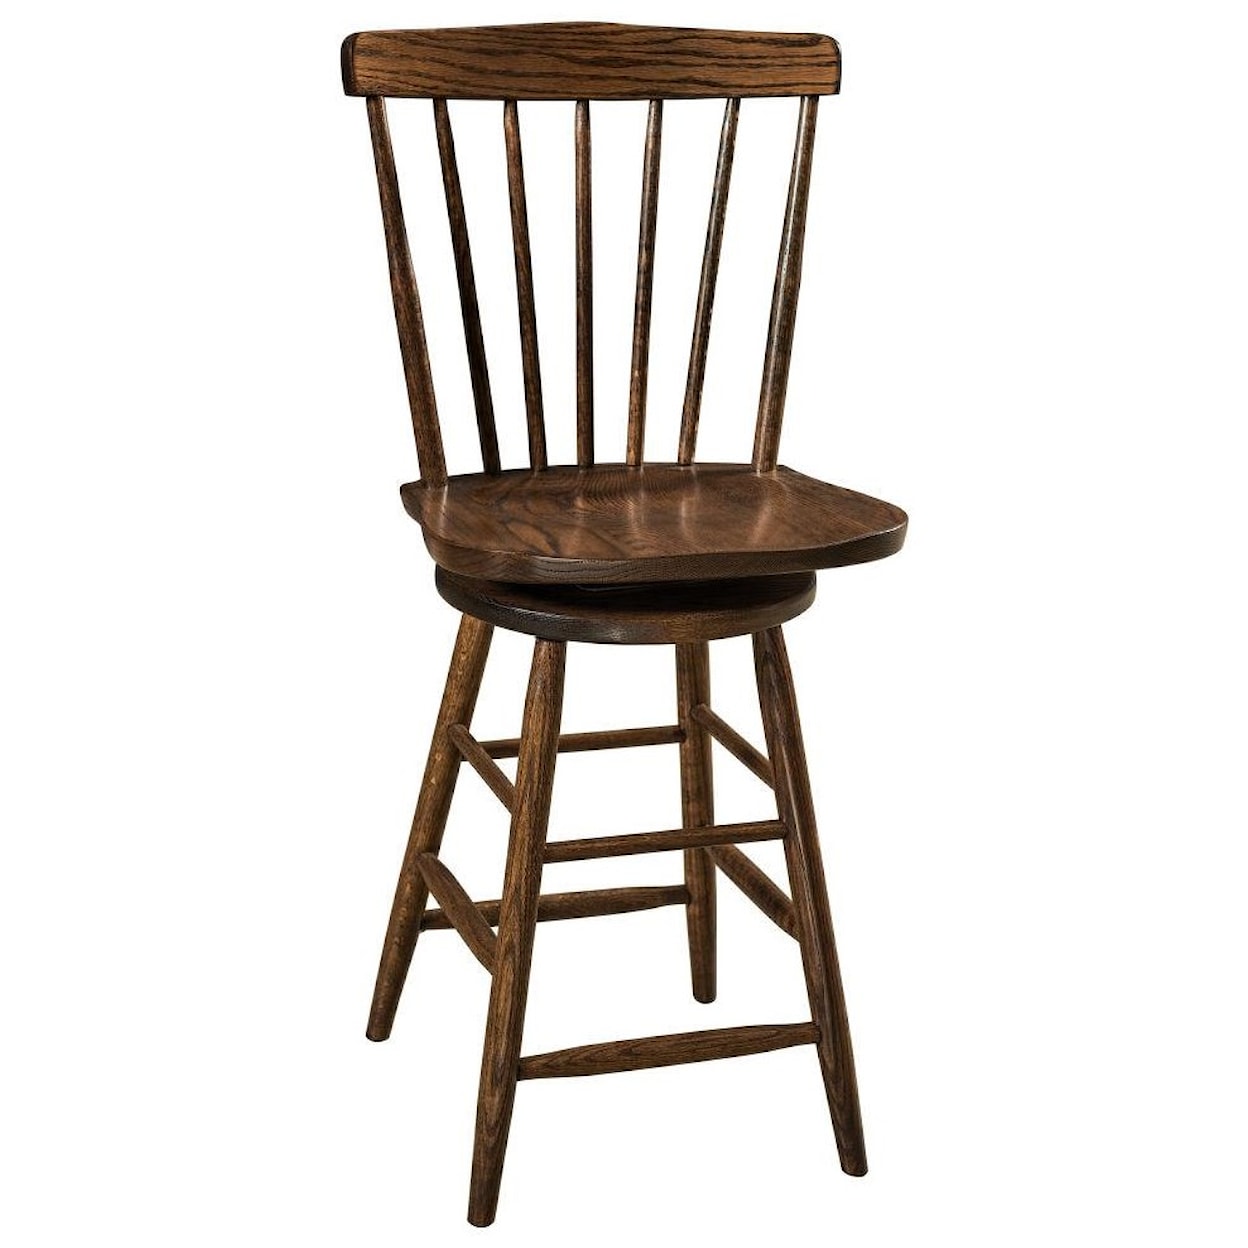 F&N Woodworking Cantaberry 30" Swivel Stool